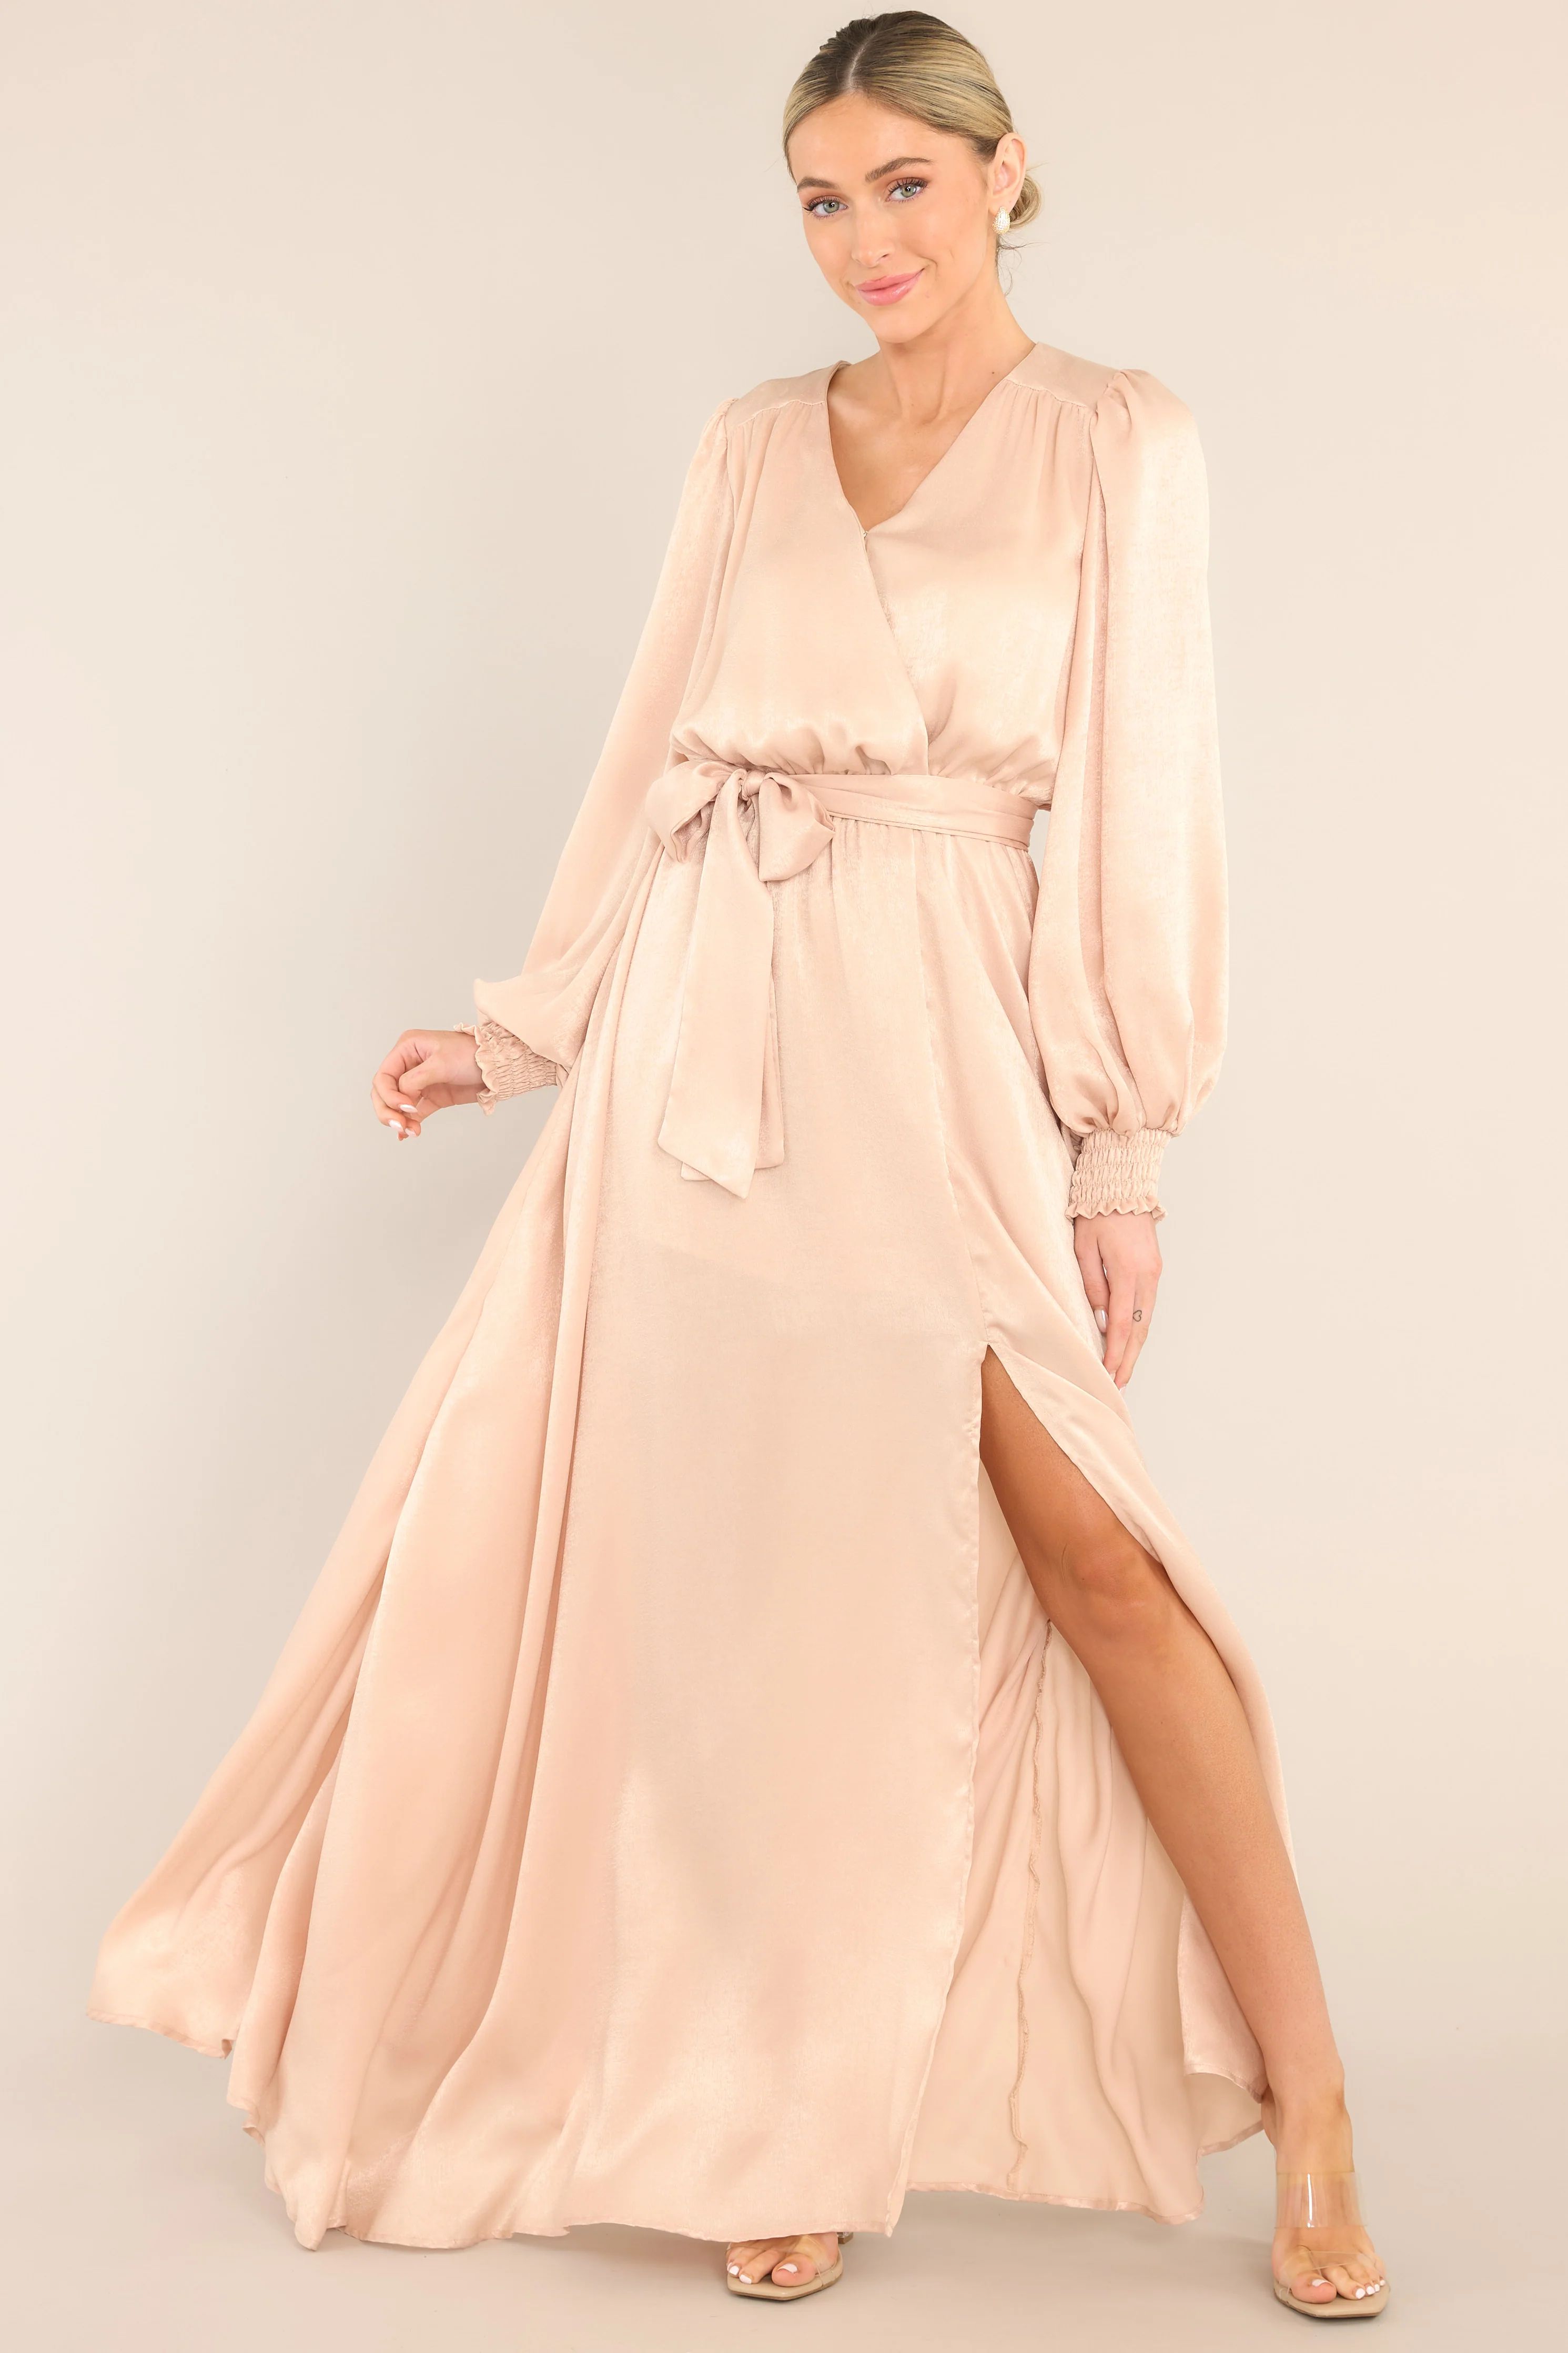 Settle The Score Champagne Maxi Dress | Red Dress